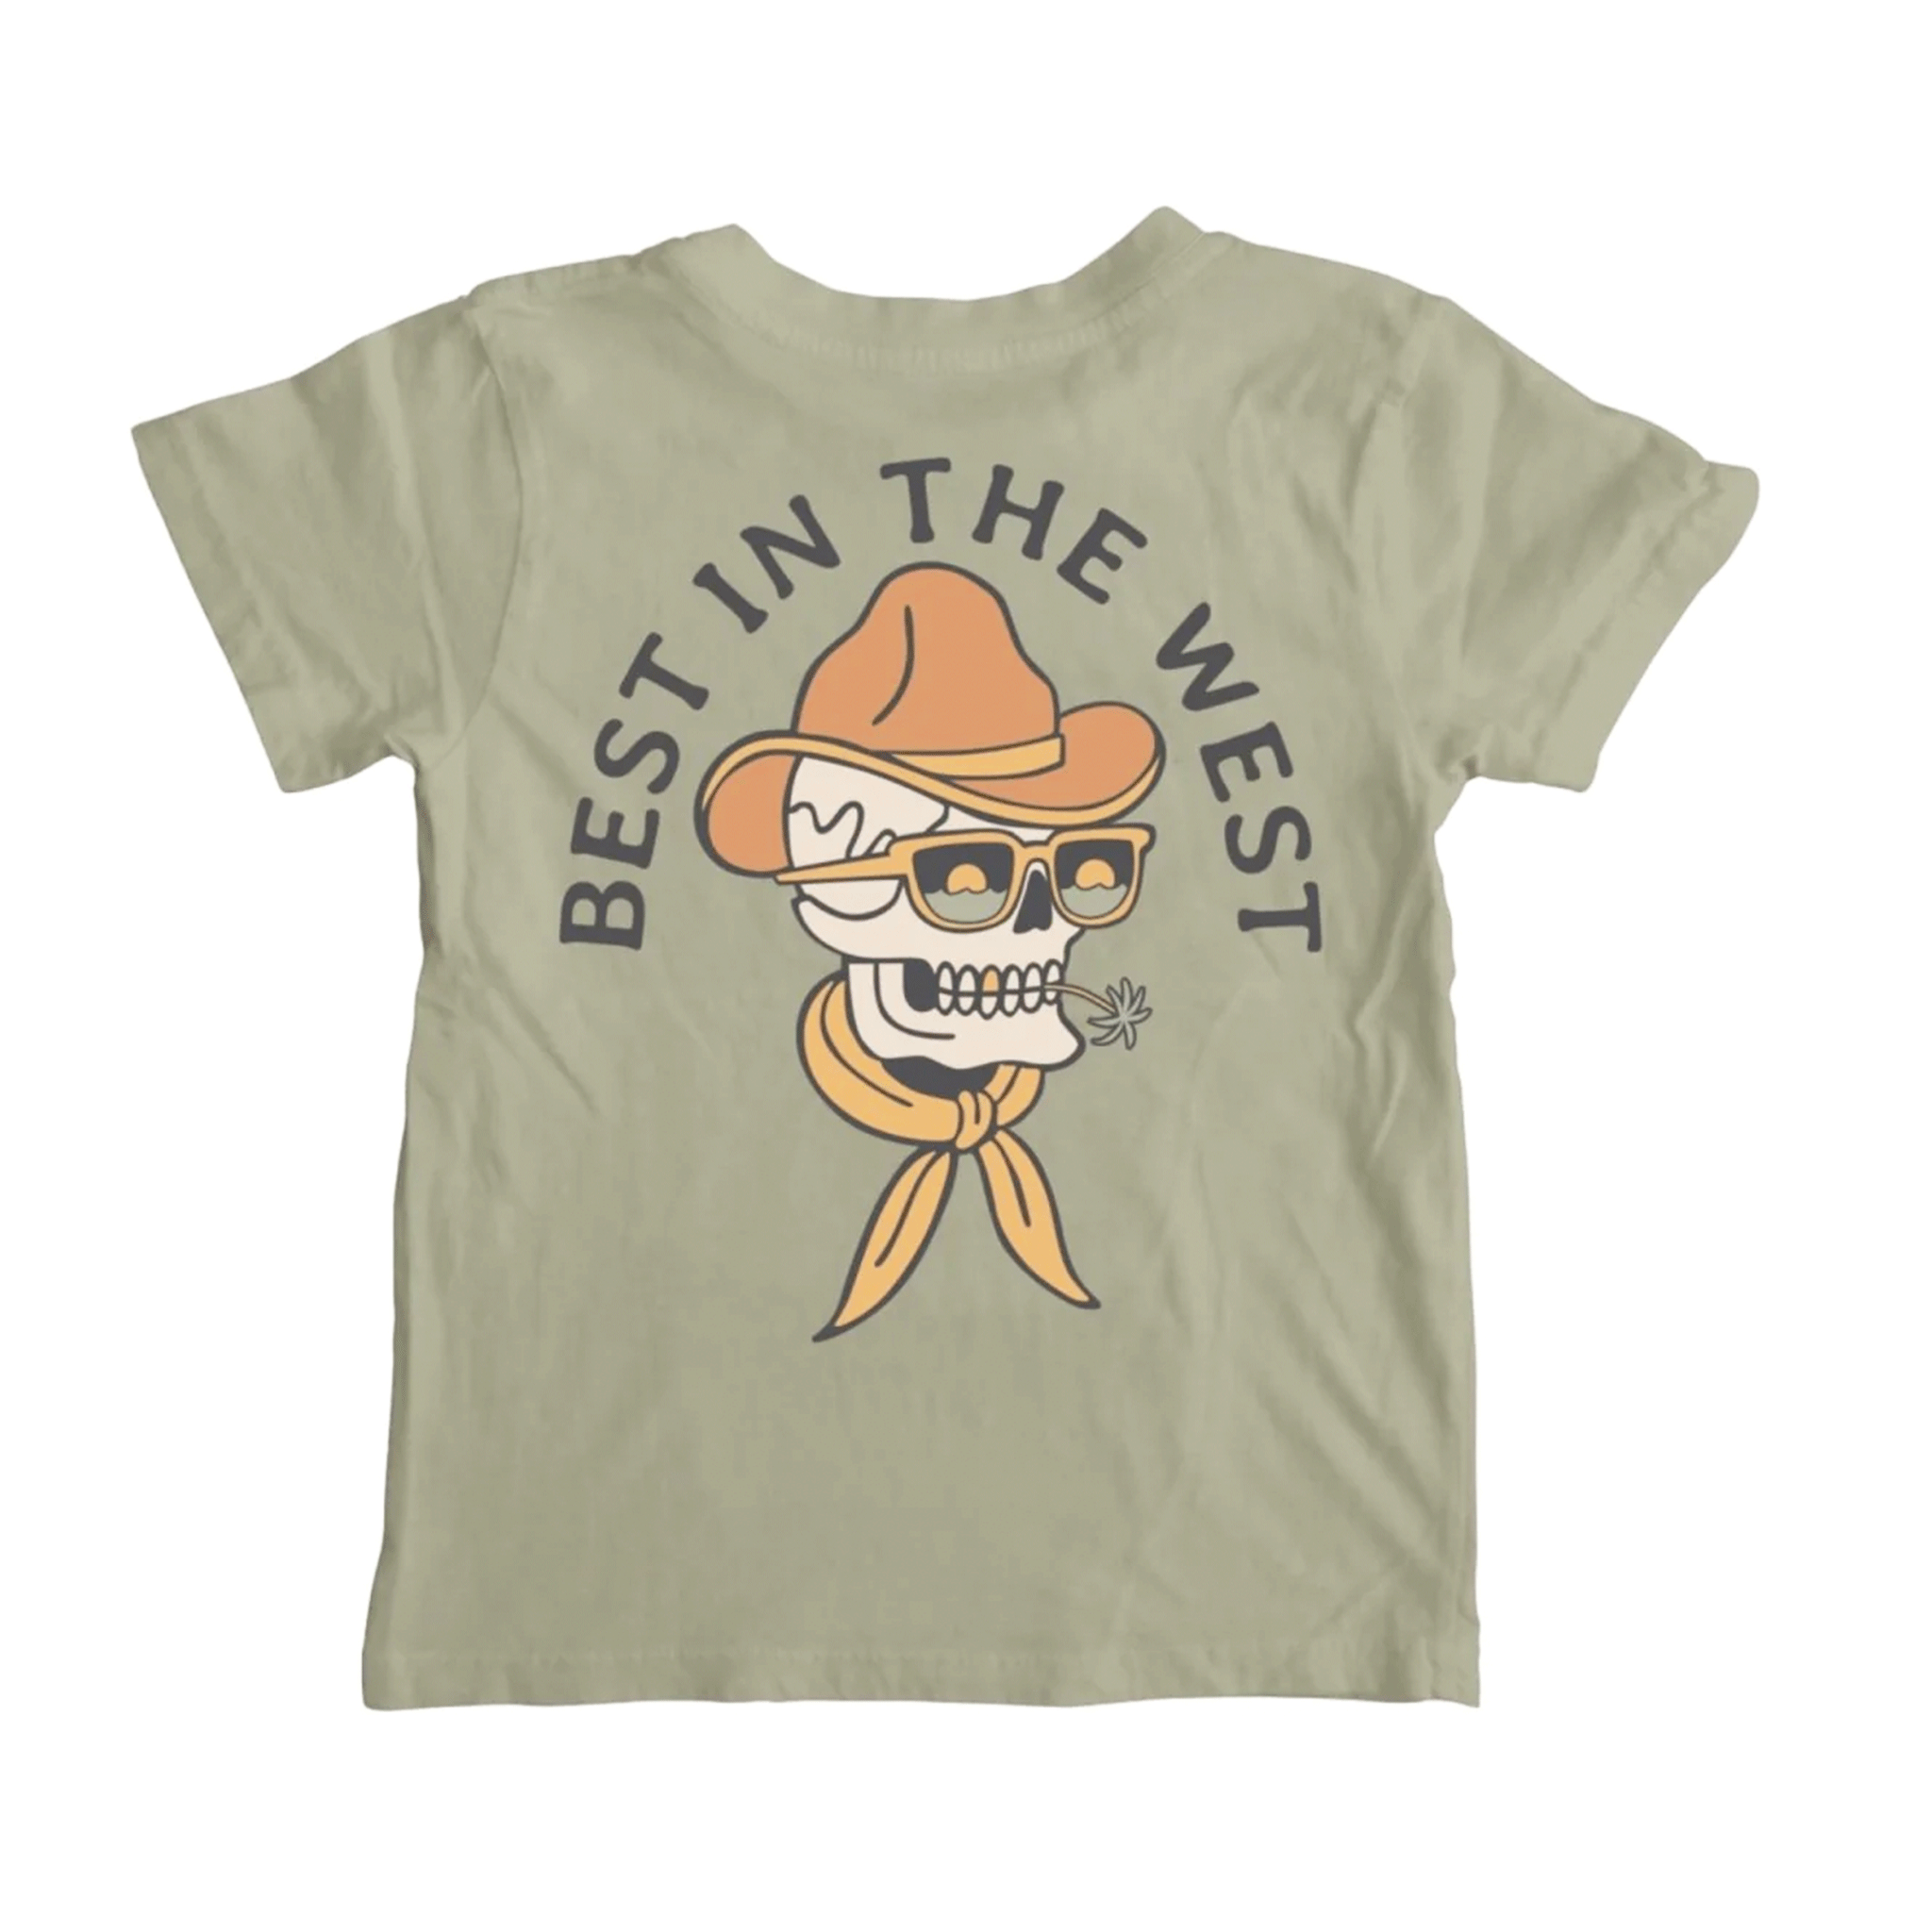 On a white background is a sage green children's t-shirt with a cowboy skull graphic on the back with text arched above the graphic that reads, "Best In The West".  